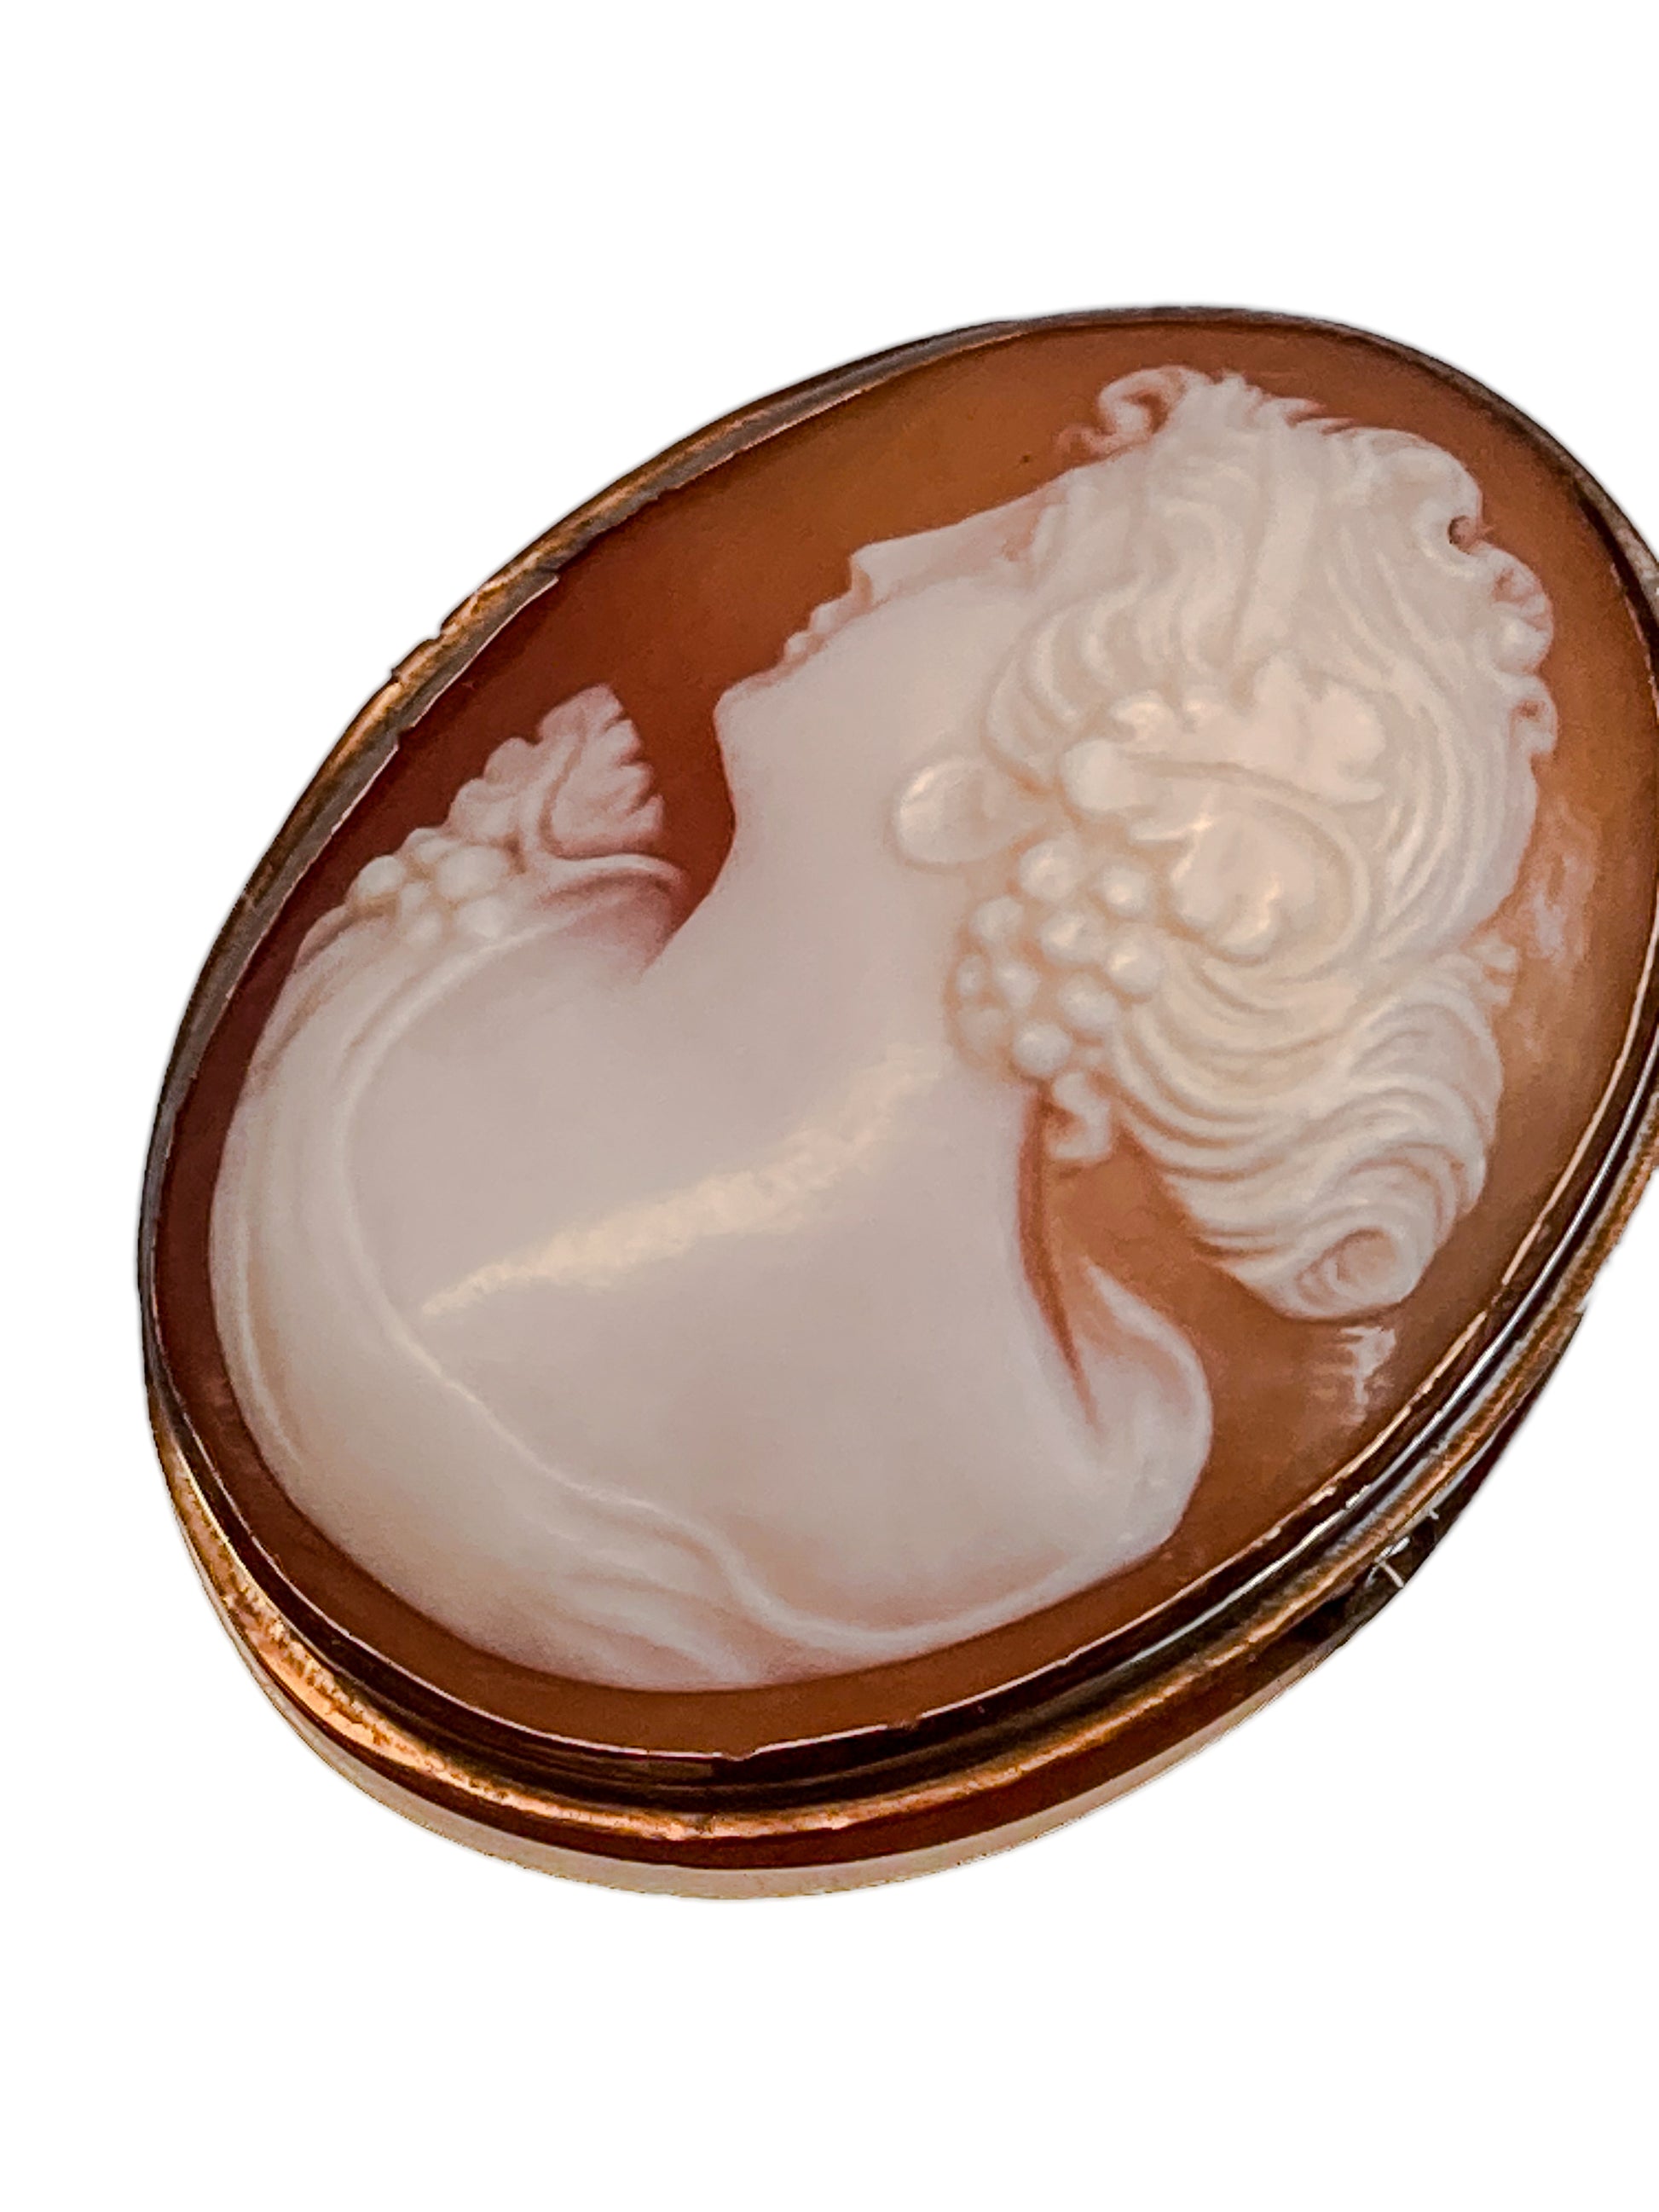 Antique Carved Shell Cameo 14K Gold Bezel Convertible Brooch Pin Pendant; Early 20th Century